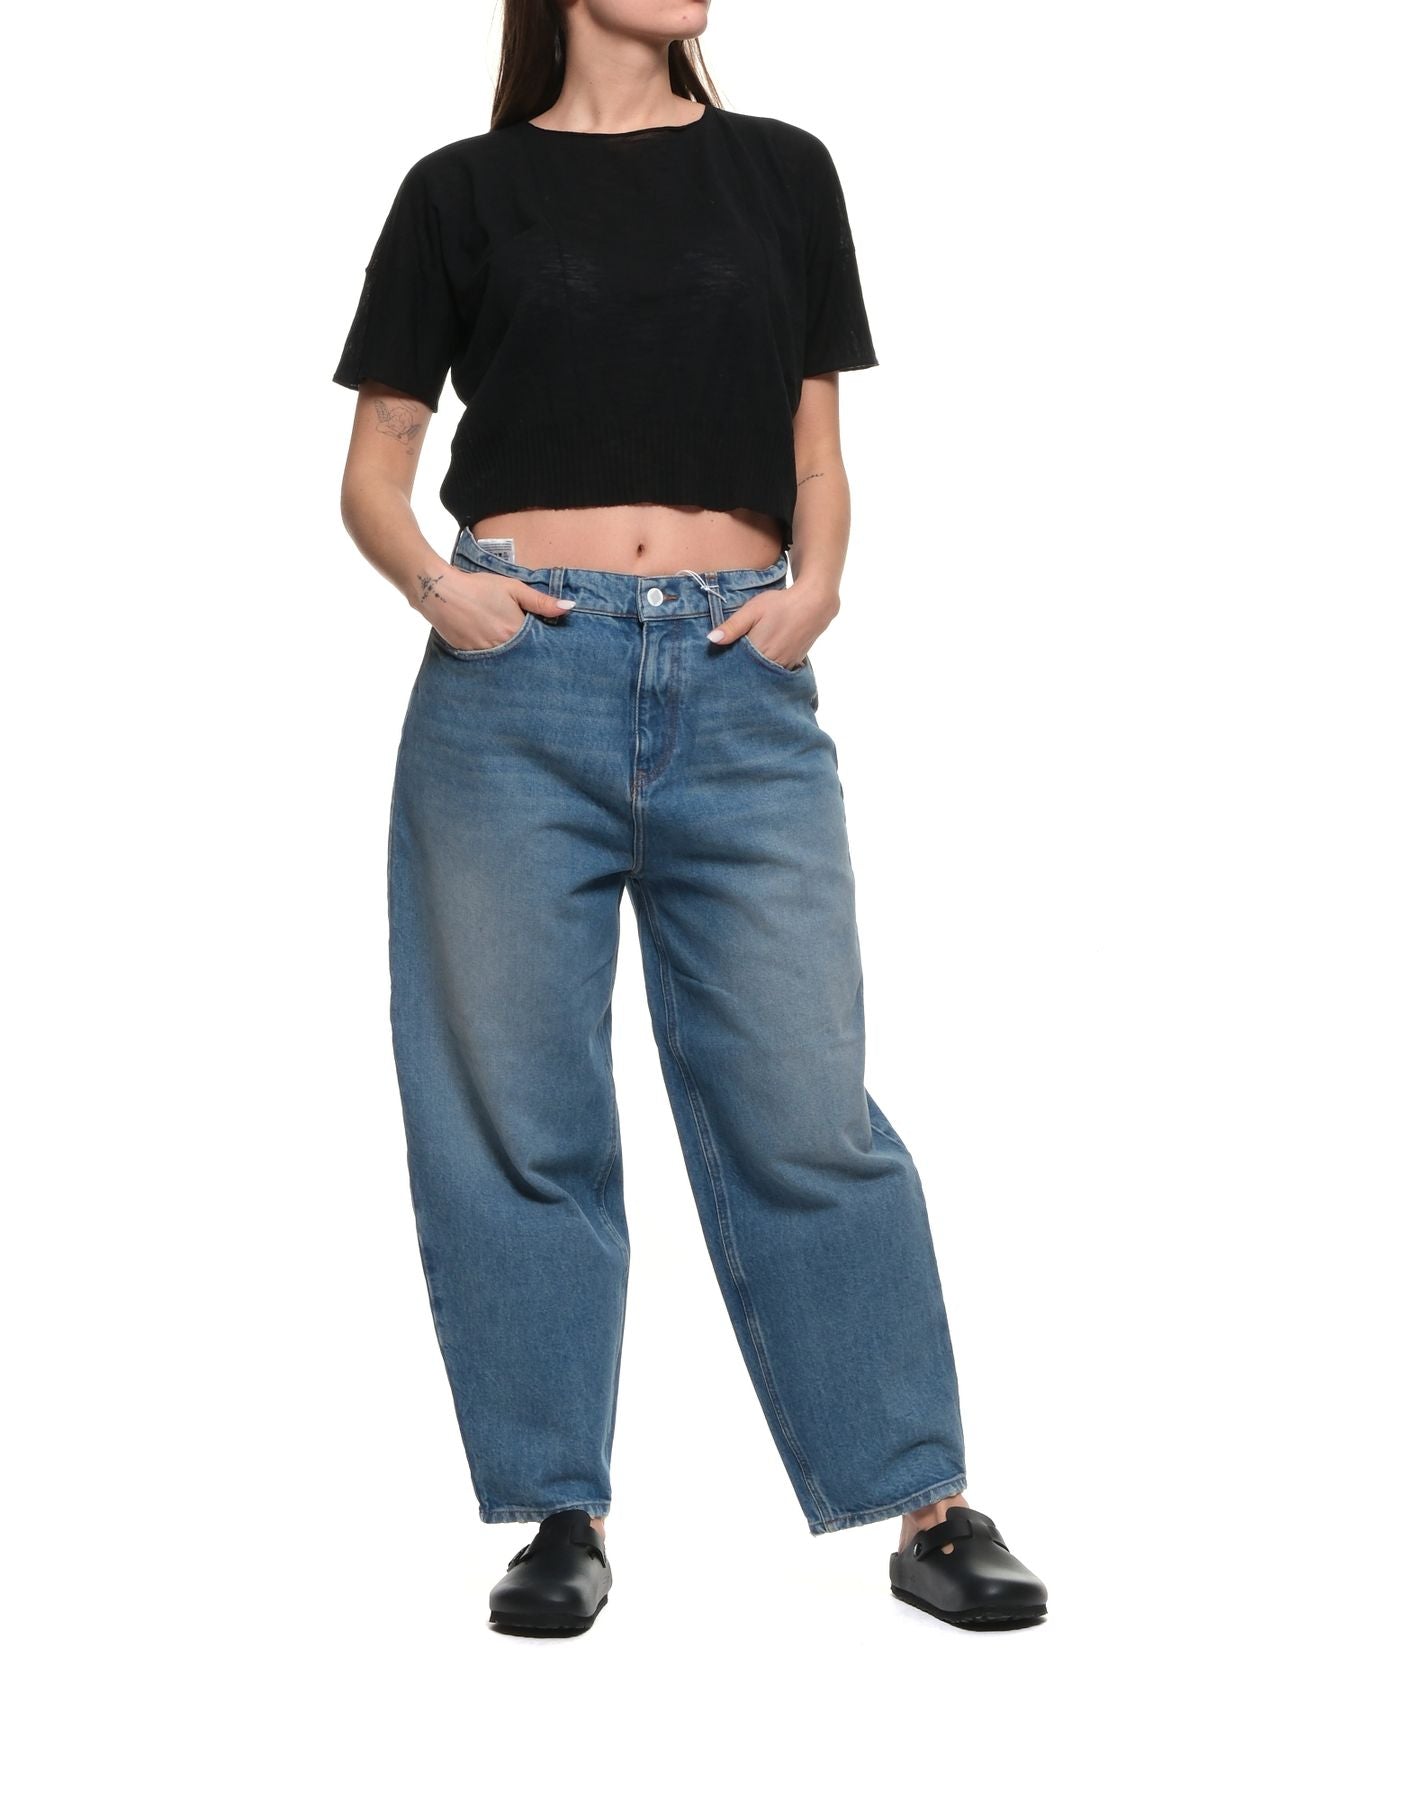 Jeans Woman AMD047D4691772 Real Vintage Amish